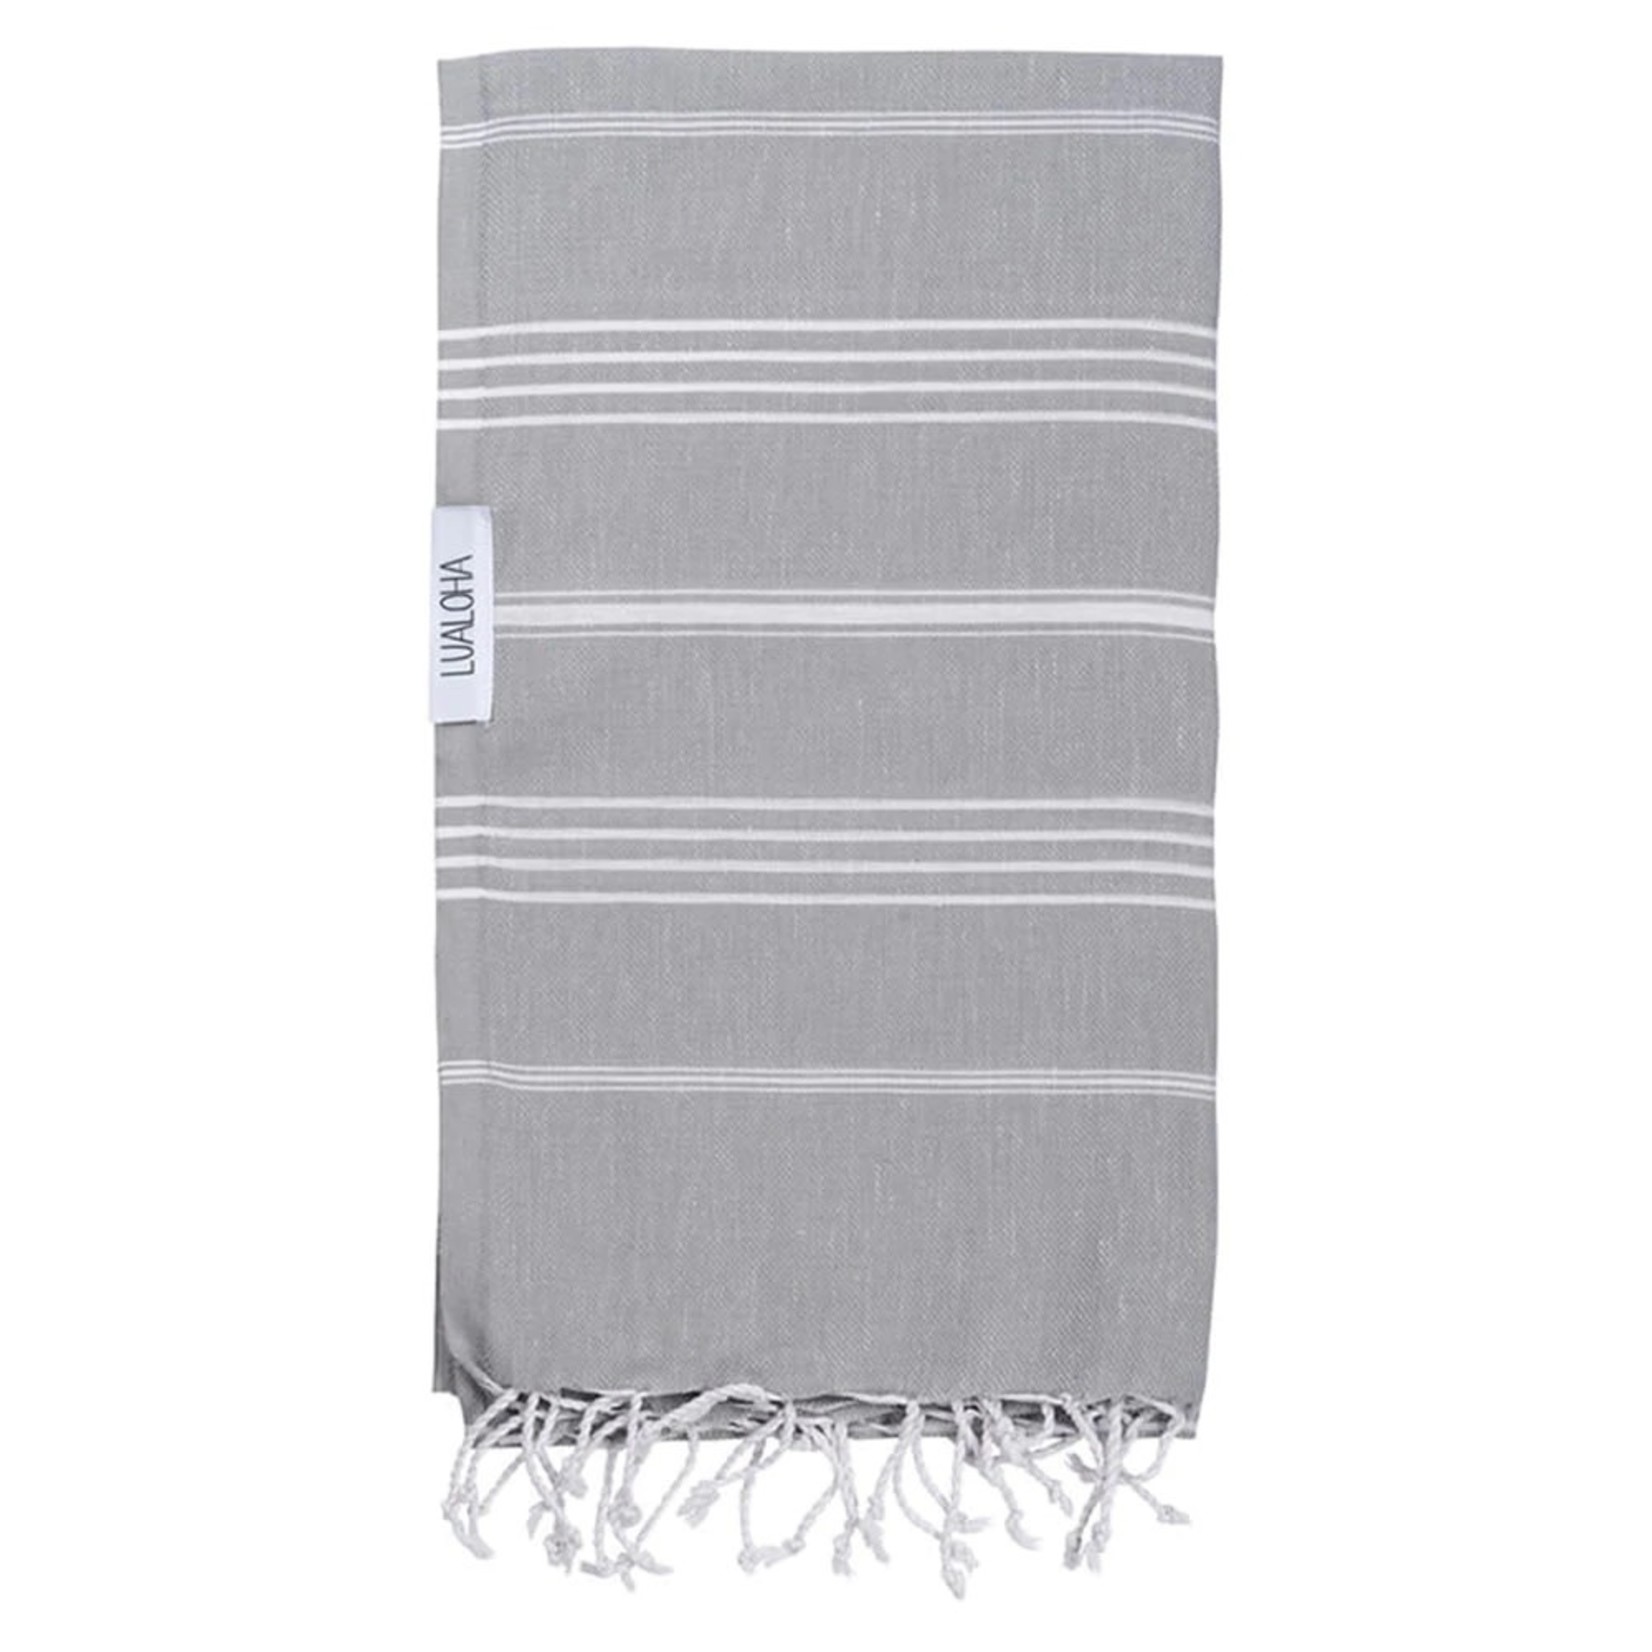 Turkish Beach Towels 100% Cotton, 39 x 69 Inches, Pre-Washed, High